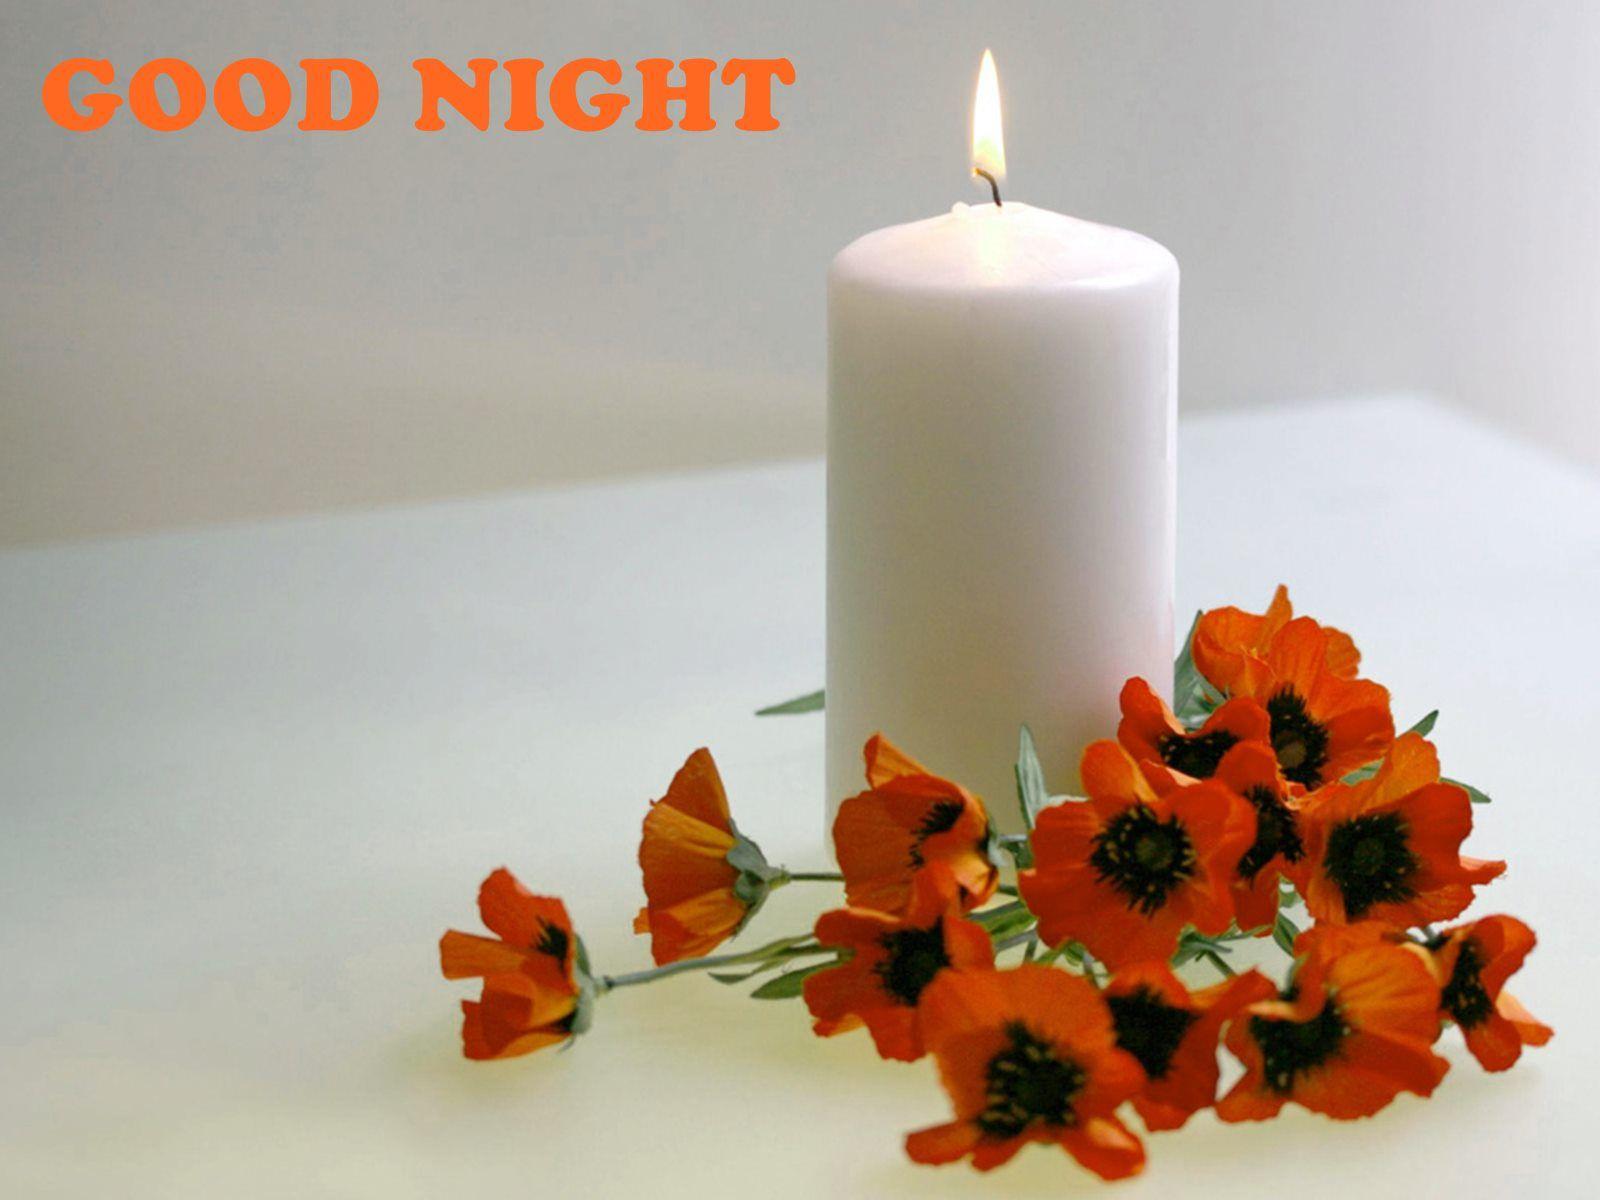 good night candle and flowers HD wallpaper. sekspic.com: Free image